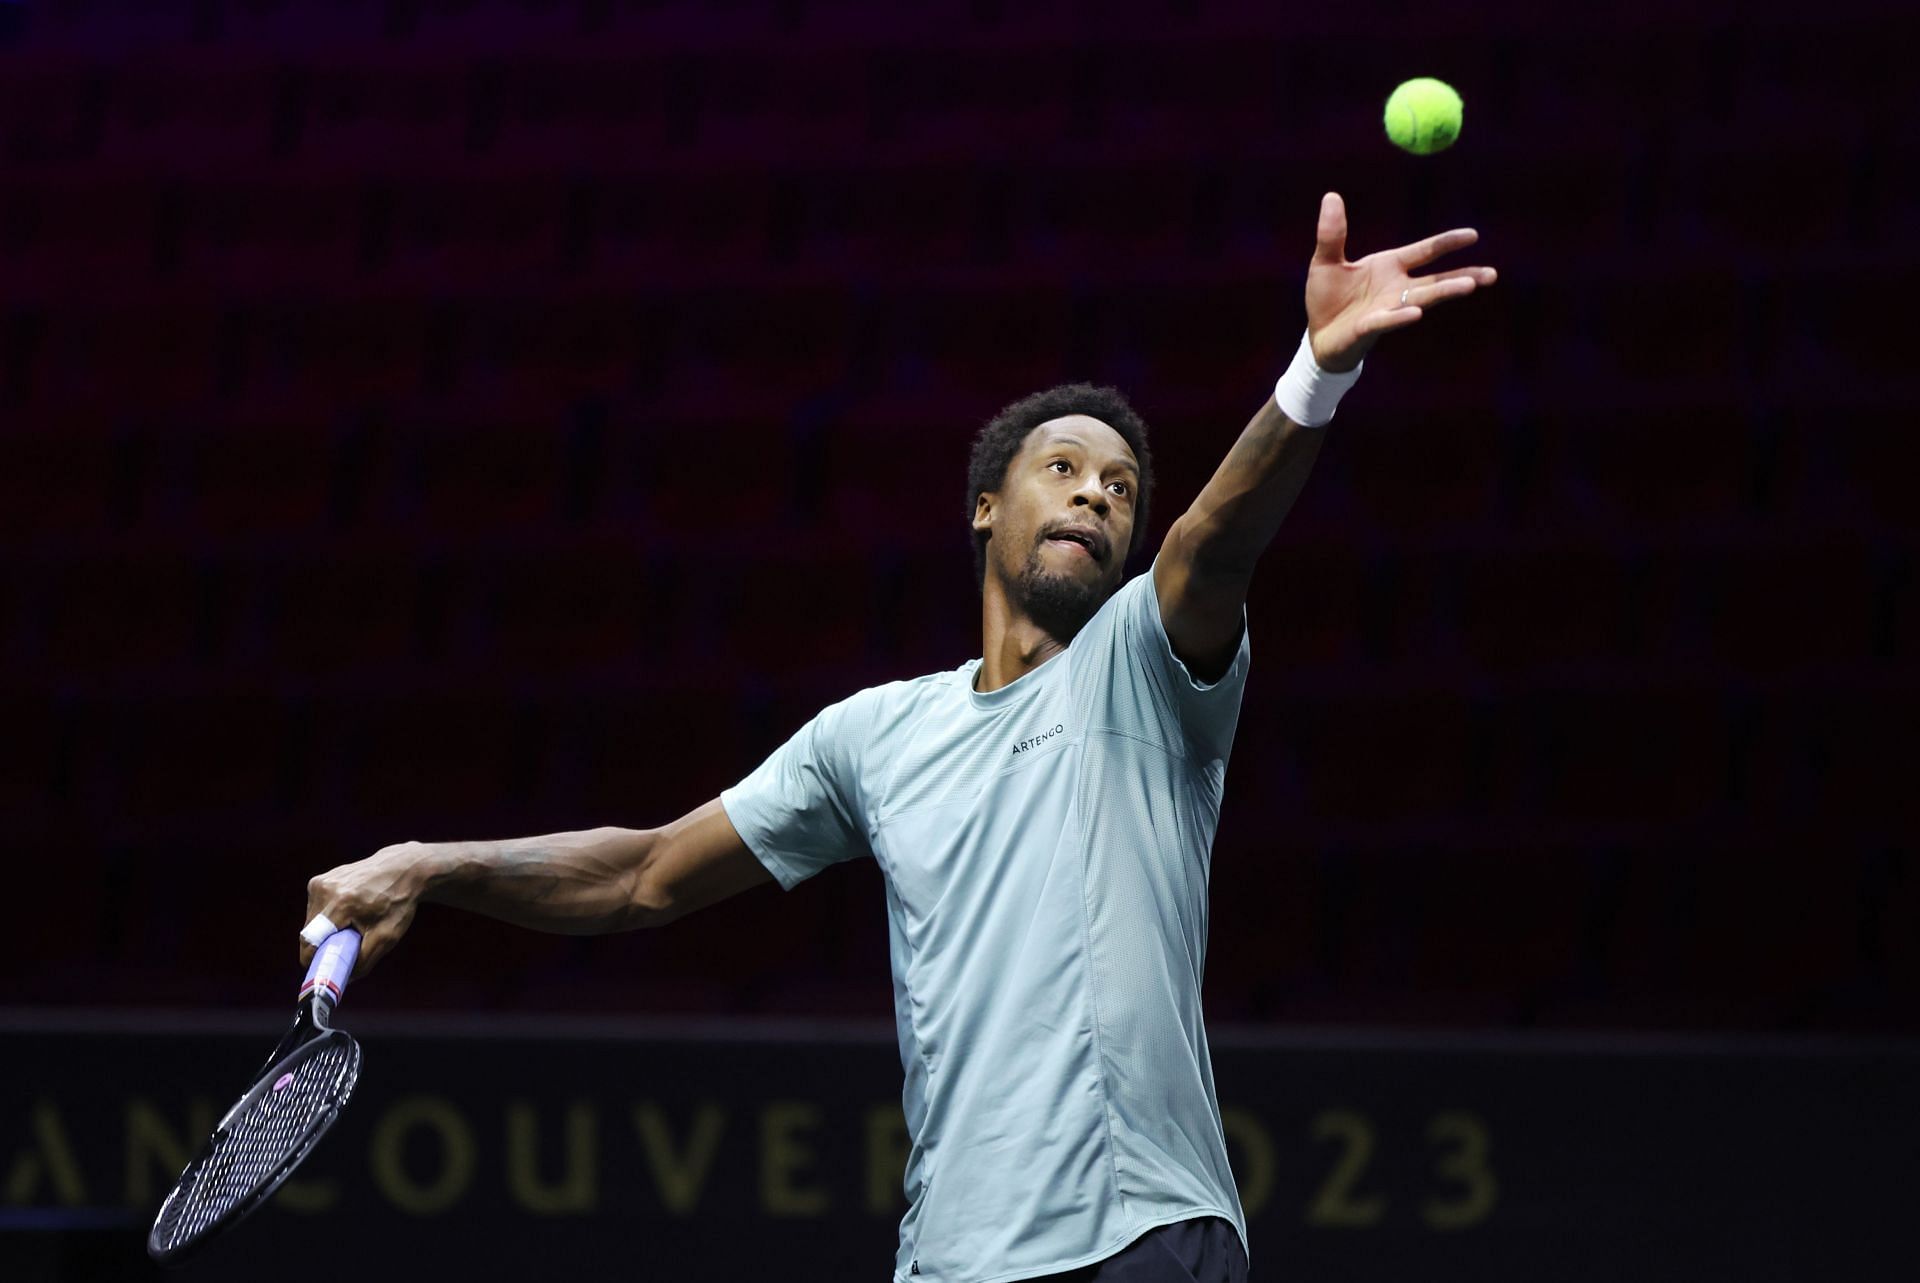 Gael Monfils at the 2023 Laver Cup.